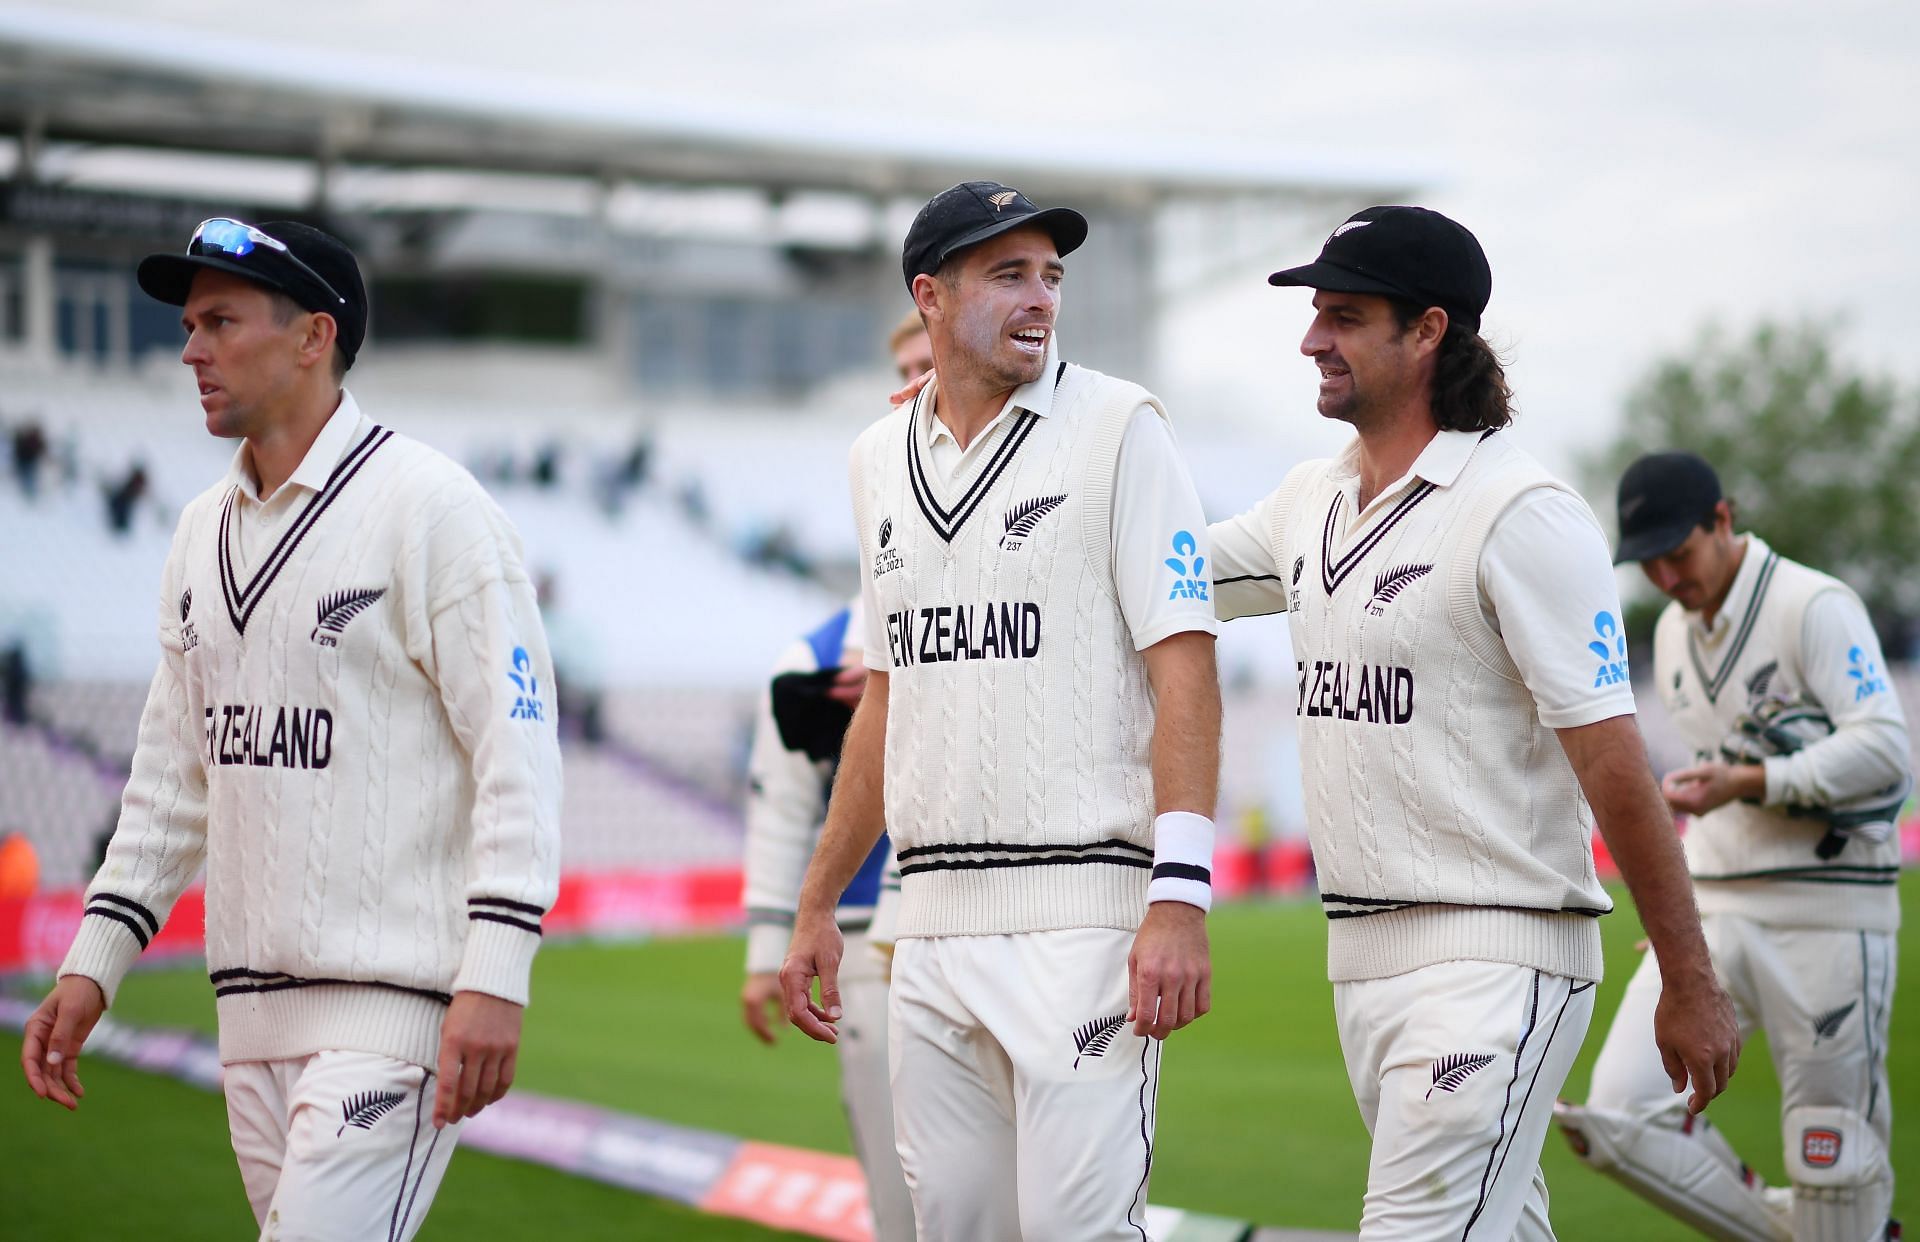 How will New Zealand cope in their T20 and Test match series